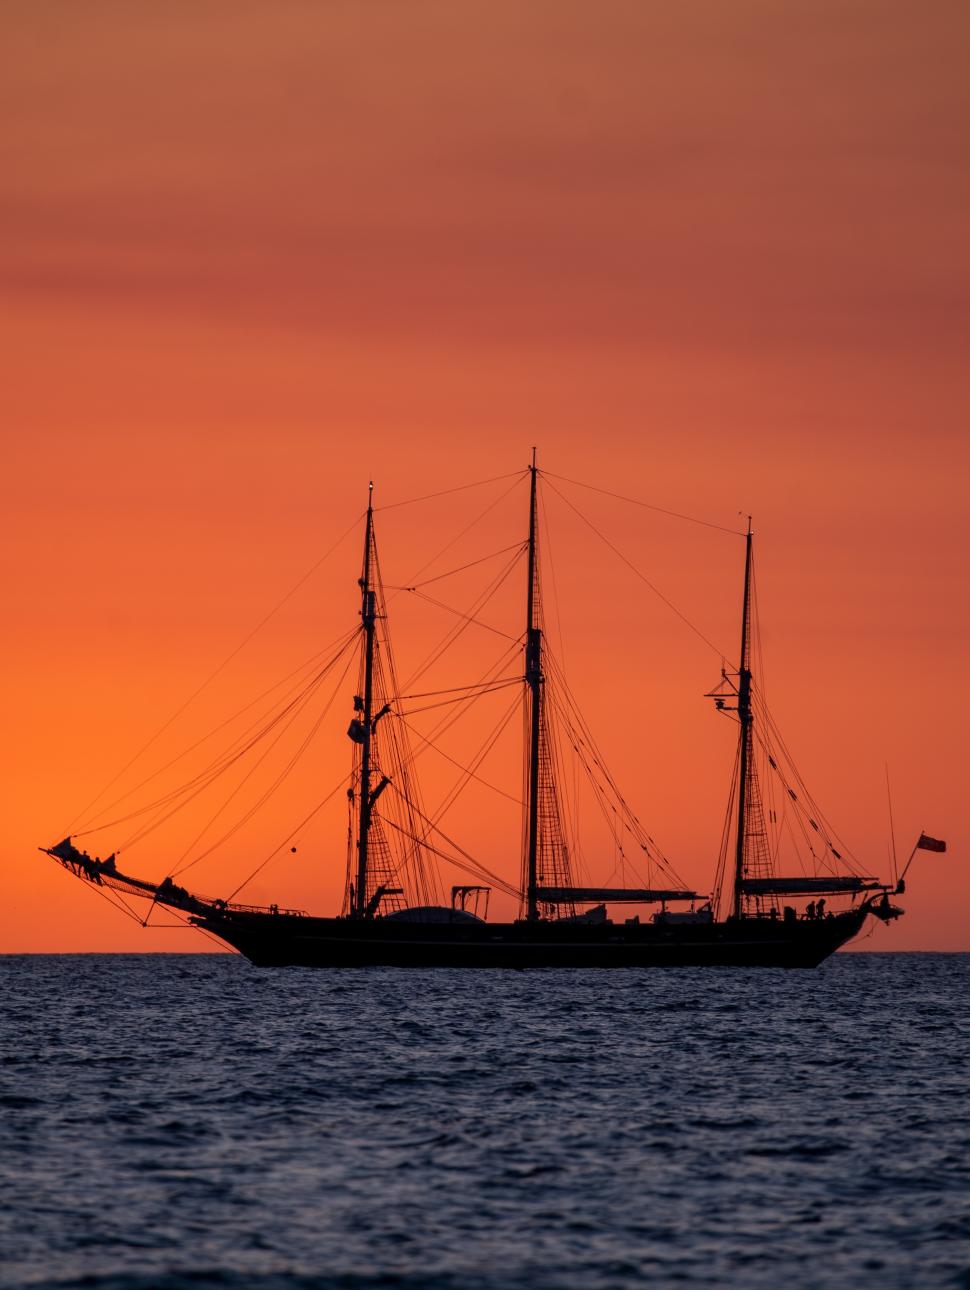 Image of an orange coloured sunset on the ocean with a yacht in silhouette